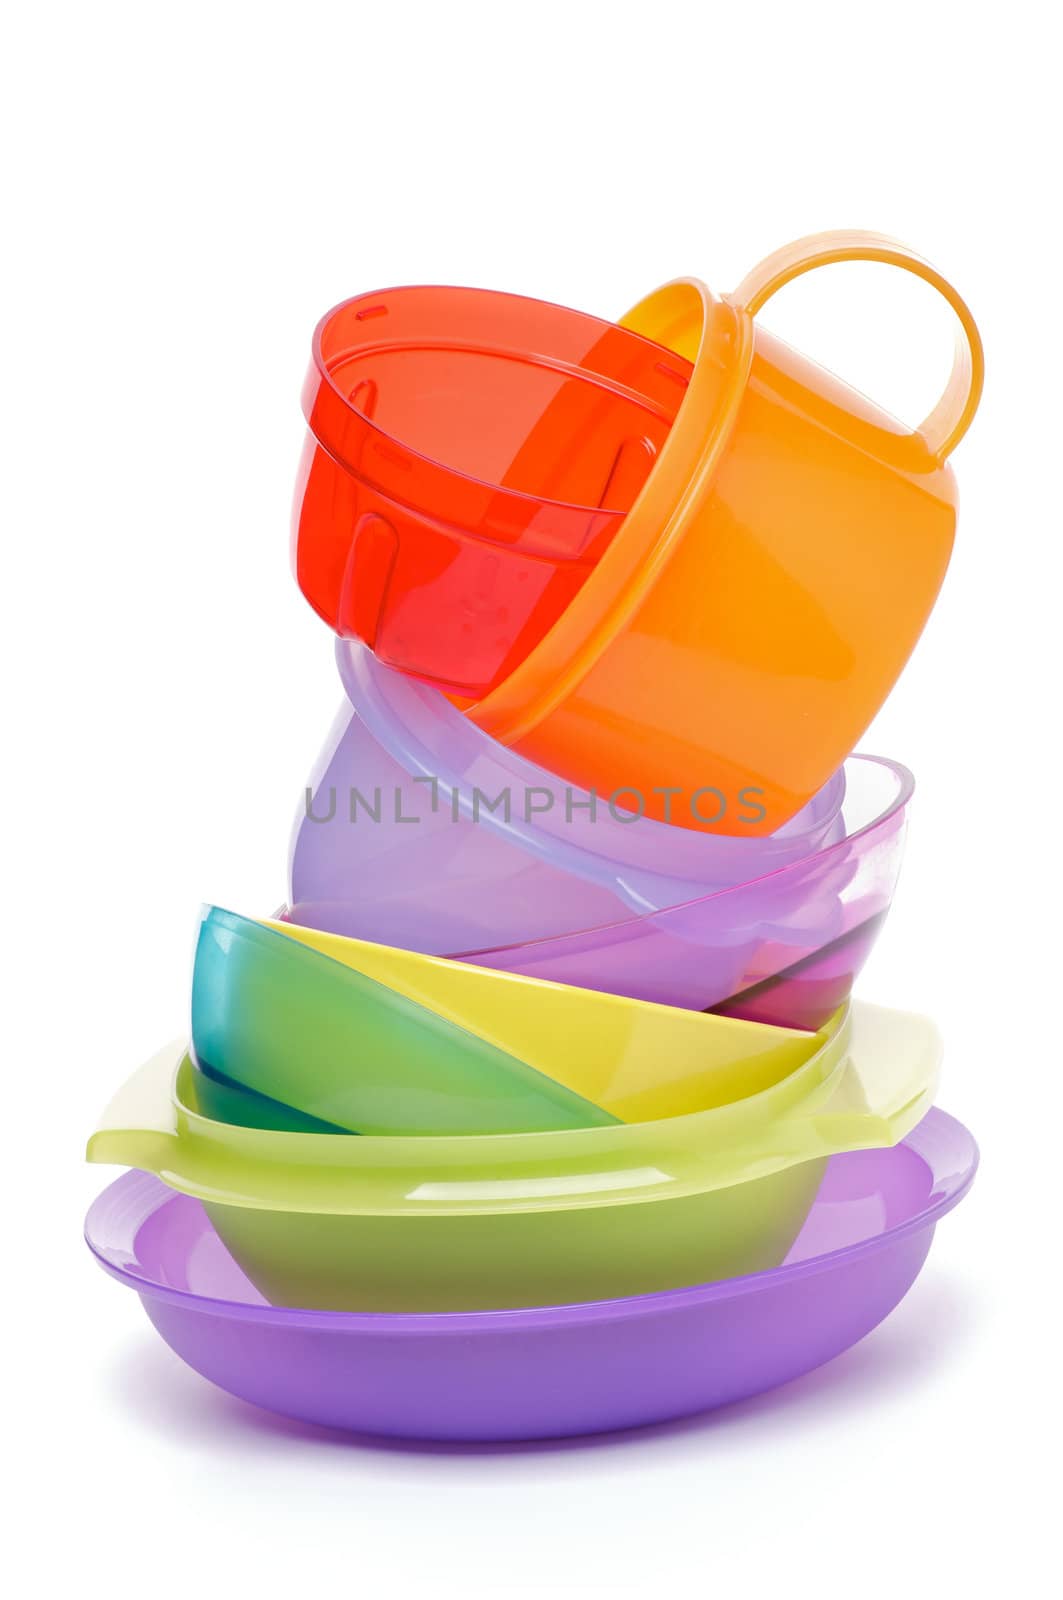 Stack of Plastic Bowls by zhekos